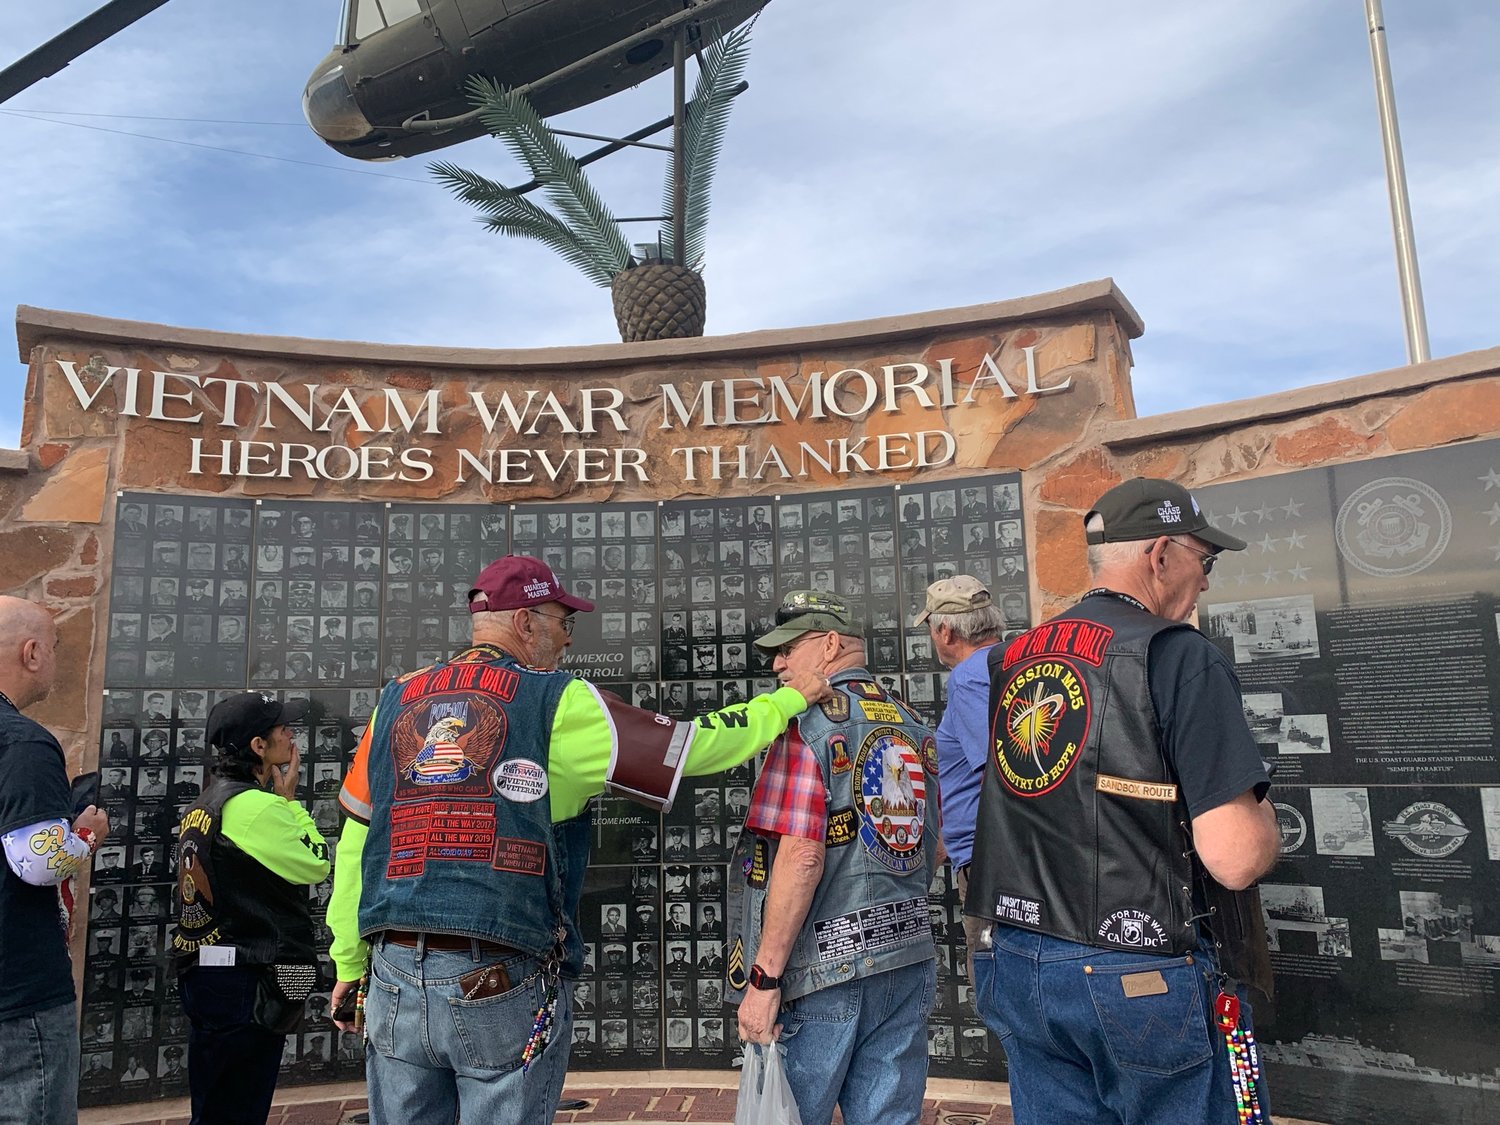 The Run for the Wall cross-country motorcycle run comes through Las Cruces Friday, May 20, and stops to participate in a wreath-laying ceremony at the Vietnam Veterans Memorial at Las Cruces Veterans Park.